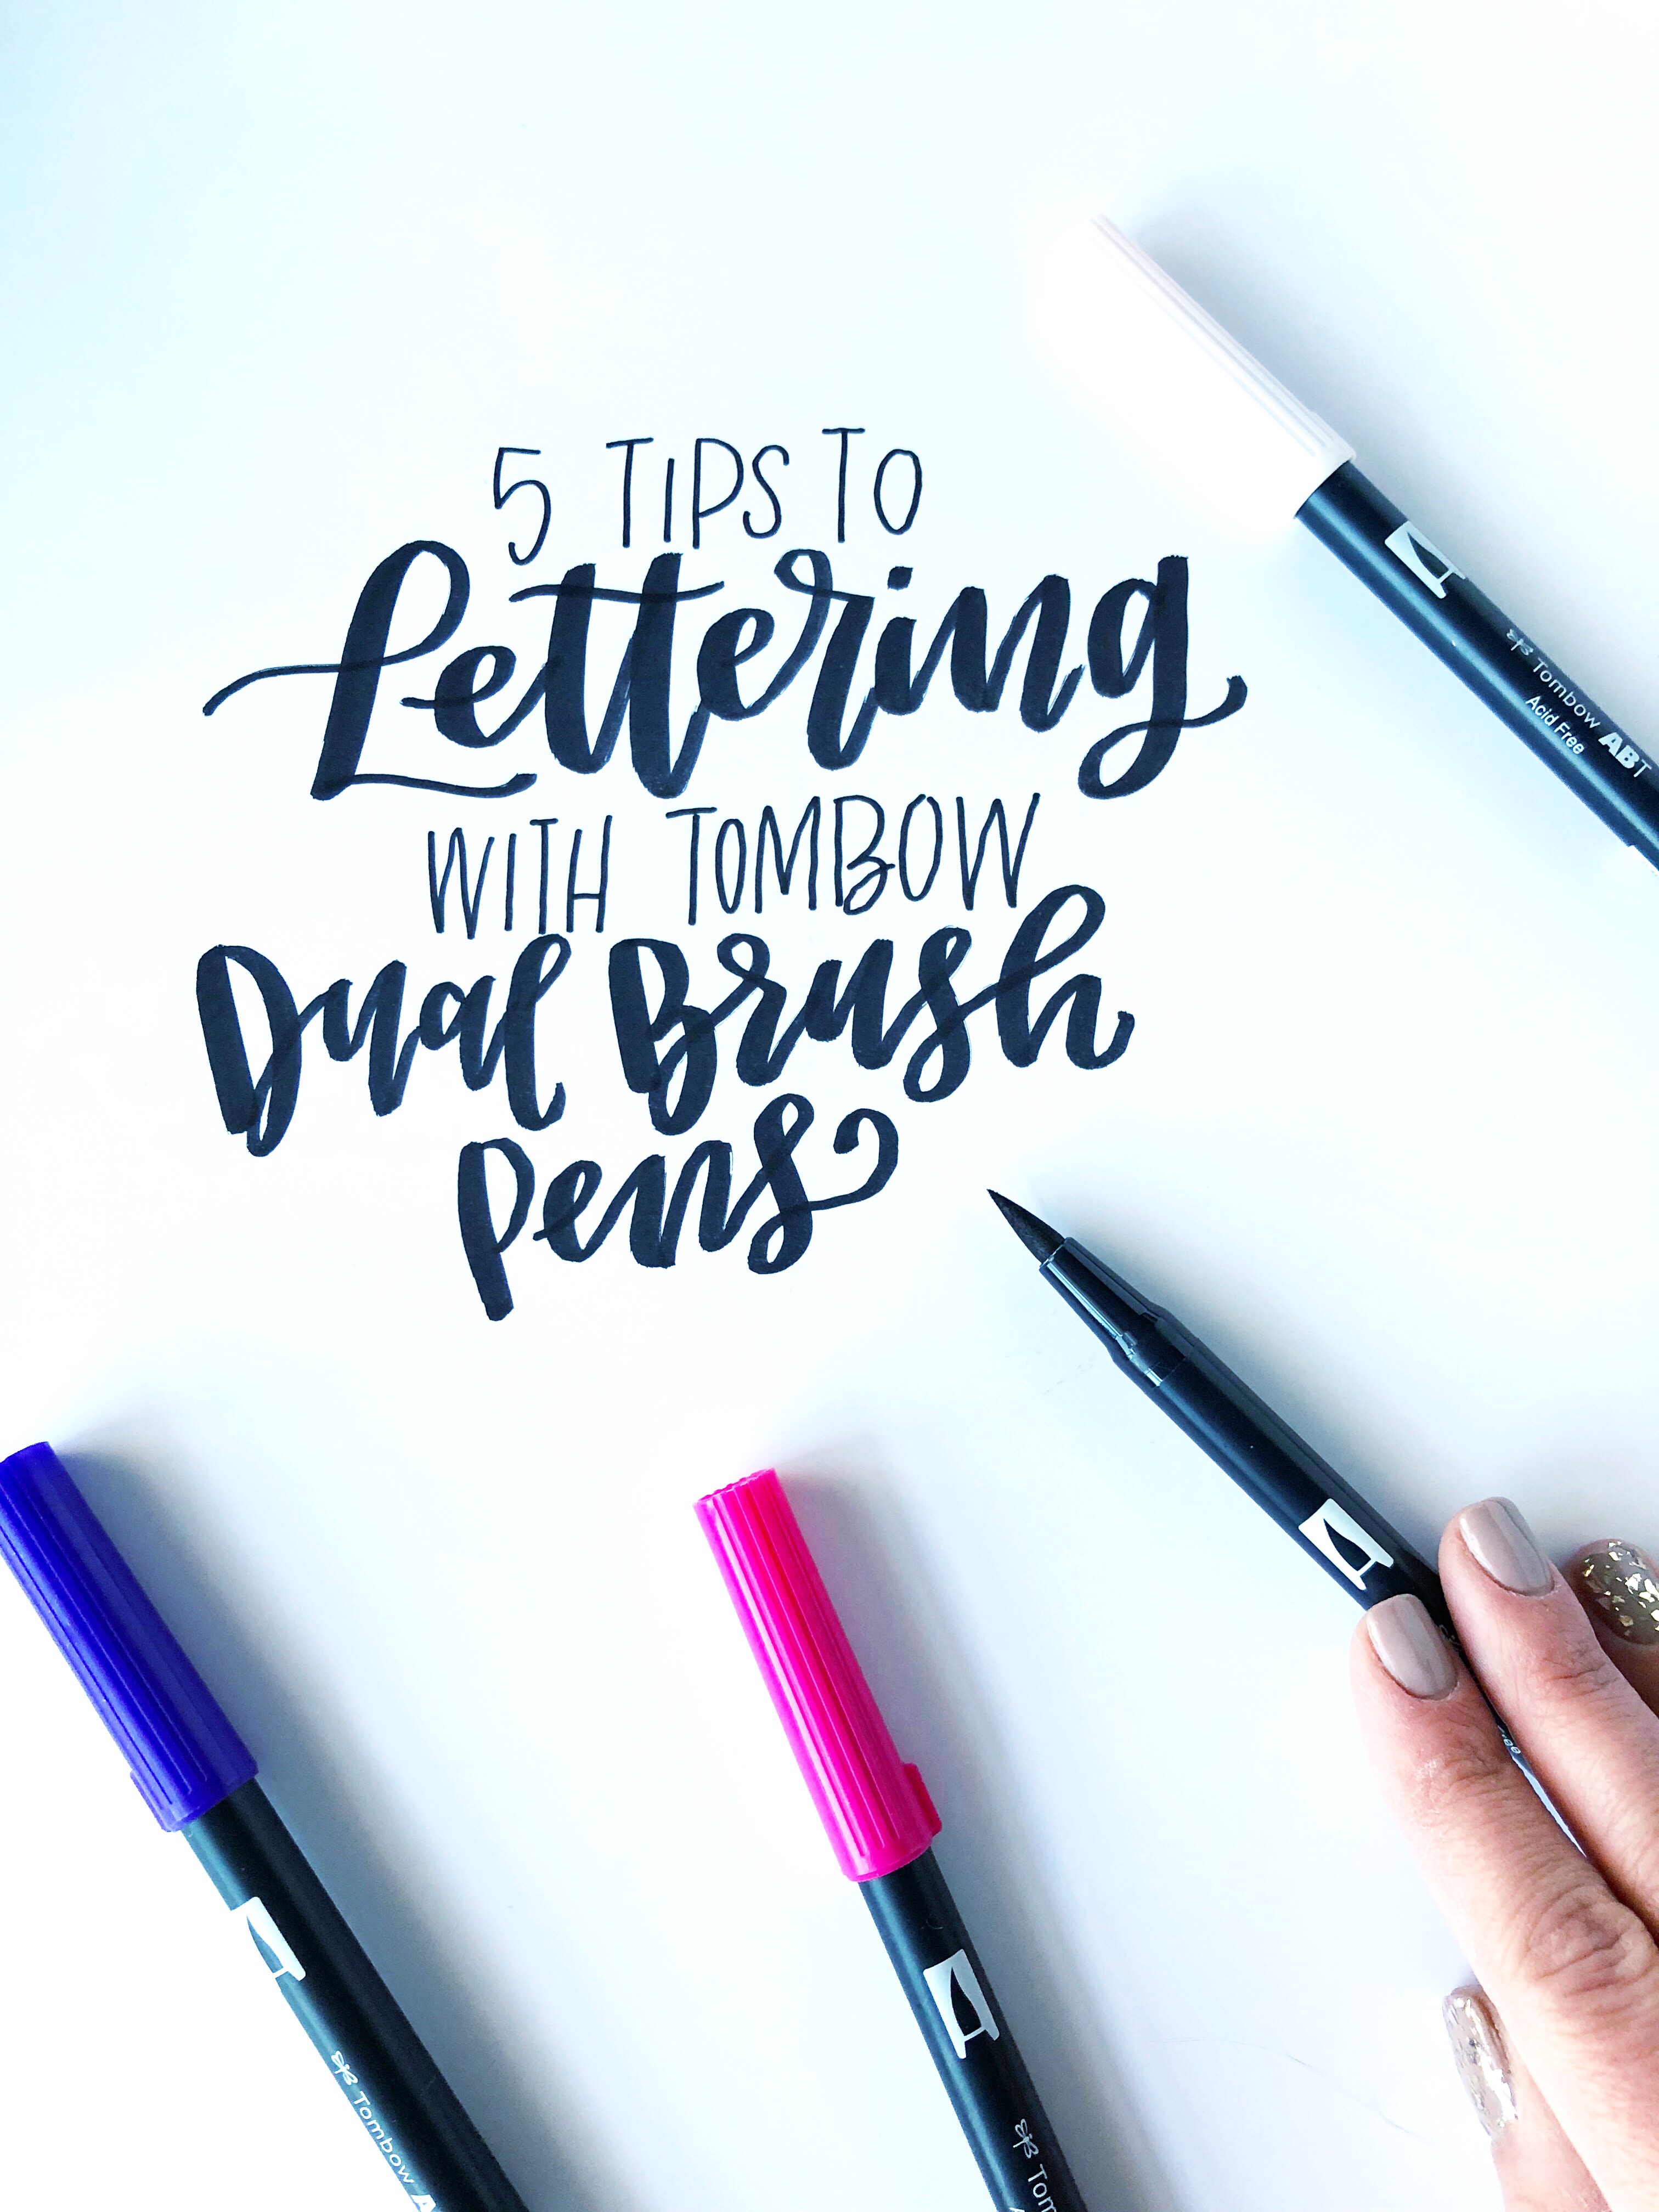 26 Tips to Lettering with Tombow Dual Brush Pens - Tombow USA Blog